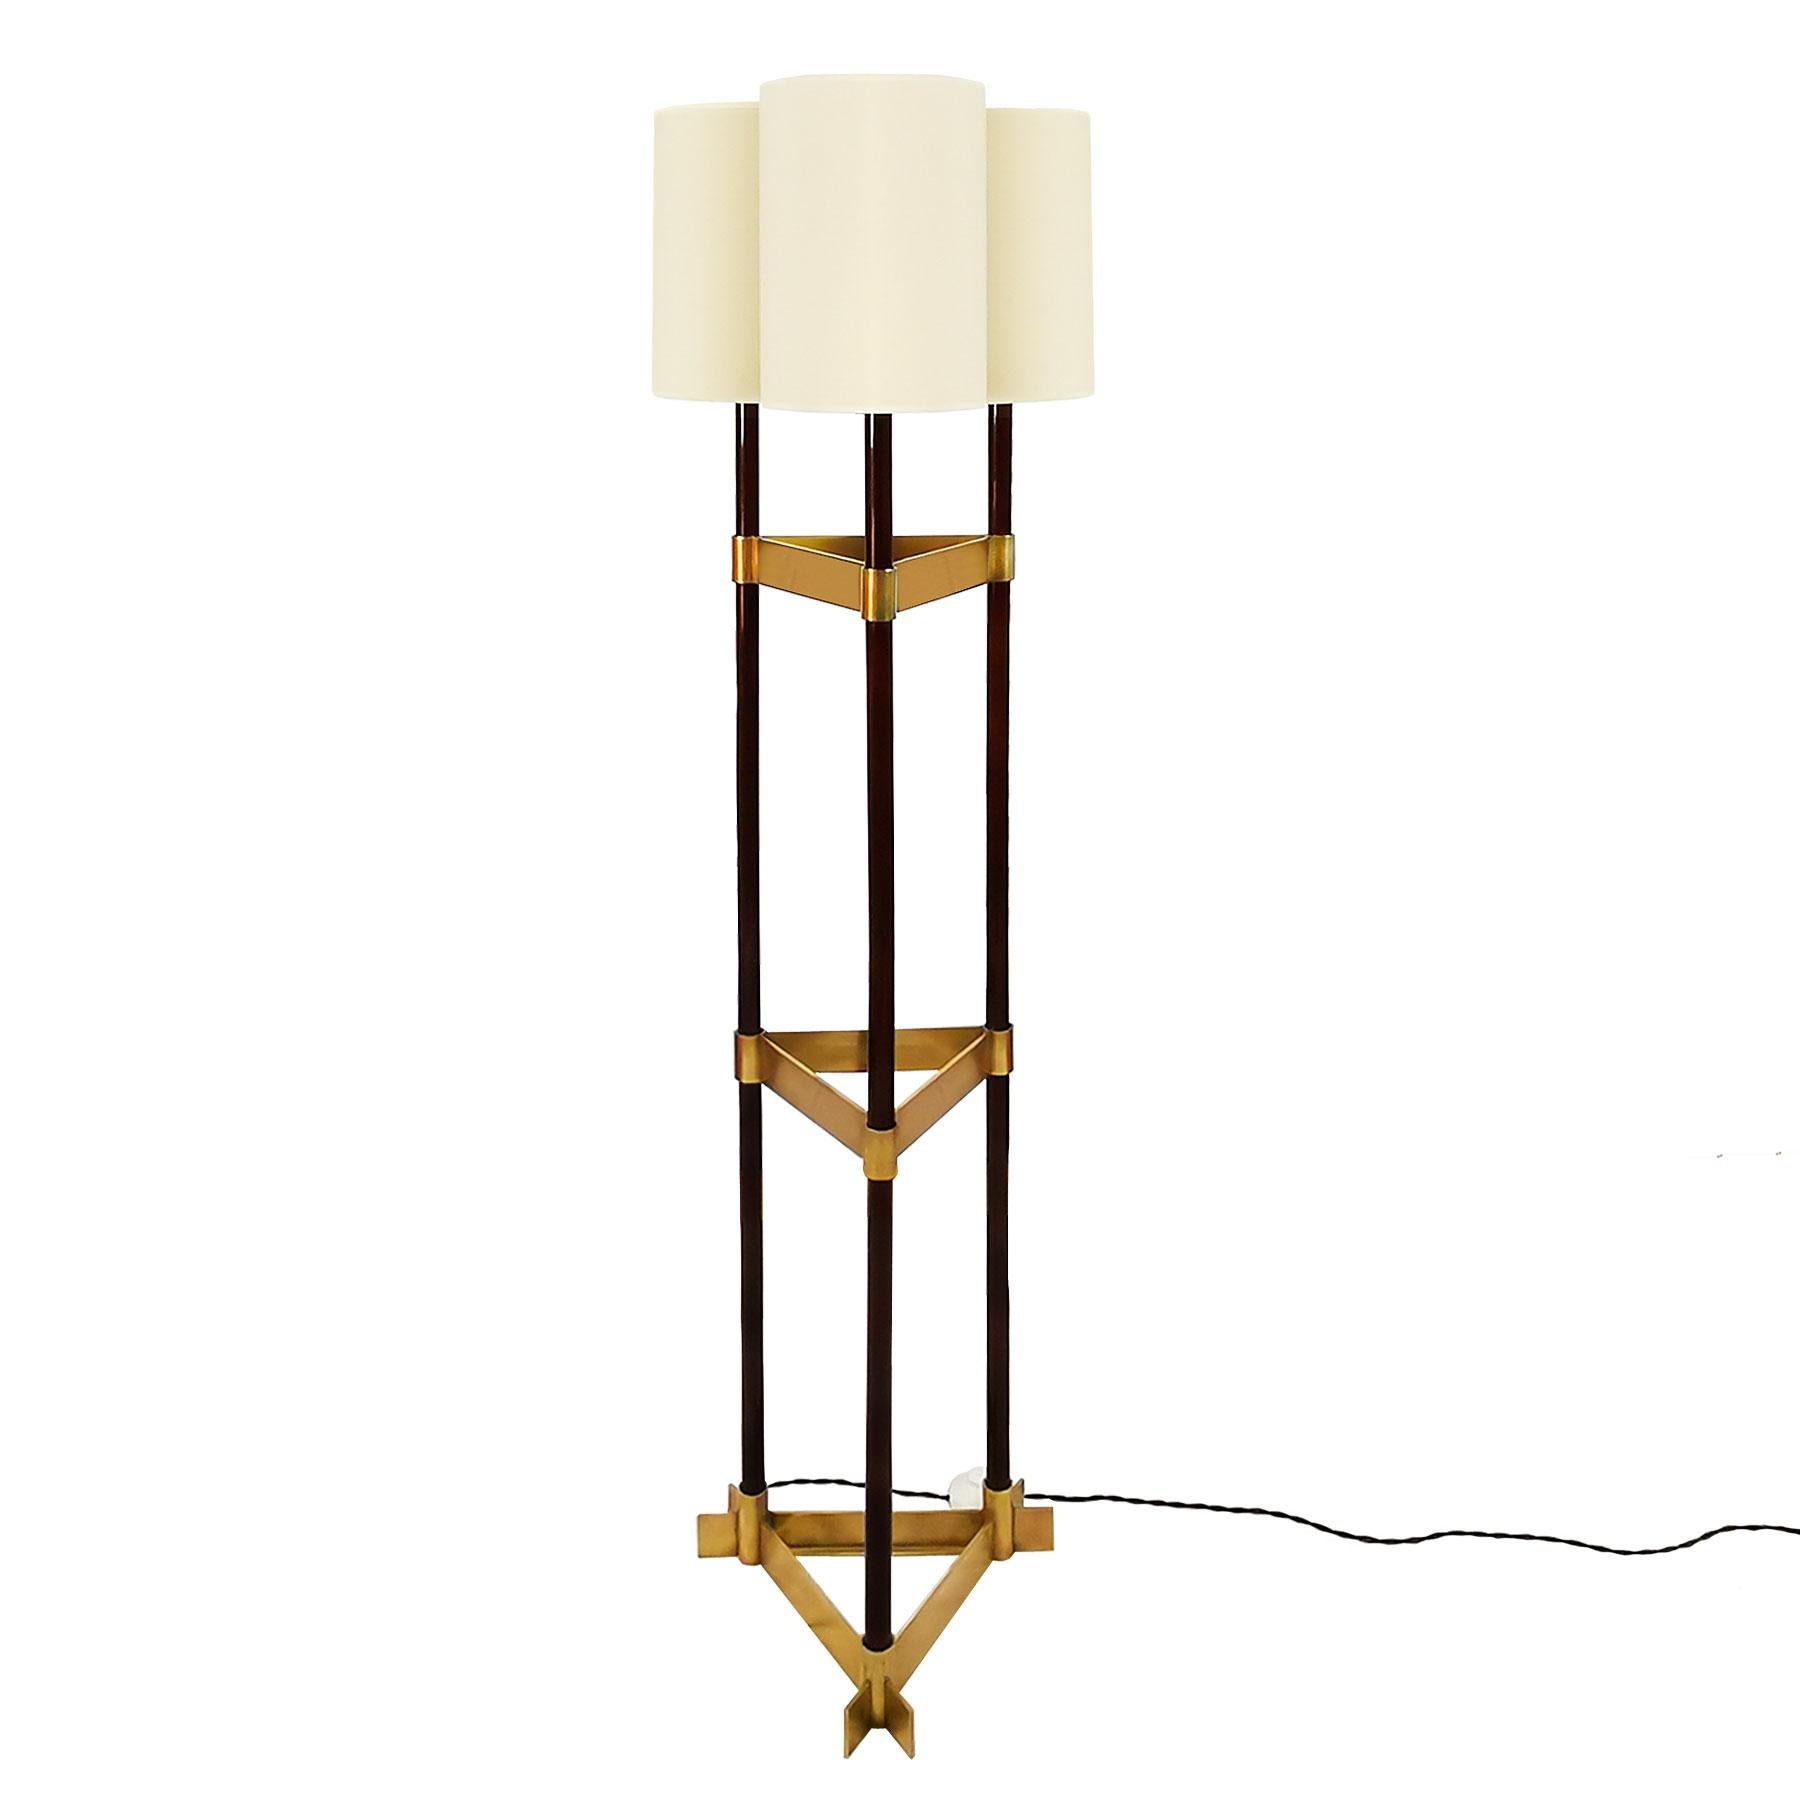 Standing lamp with three boles in solid and stained walnut (French polish), and solid polished brass. Off-white fabric lampshades.
Design: Jordi Vilanova 

Spain, Barcelona, circa 1960.